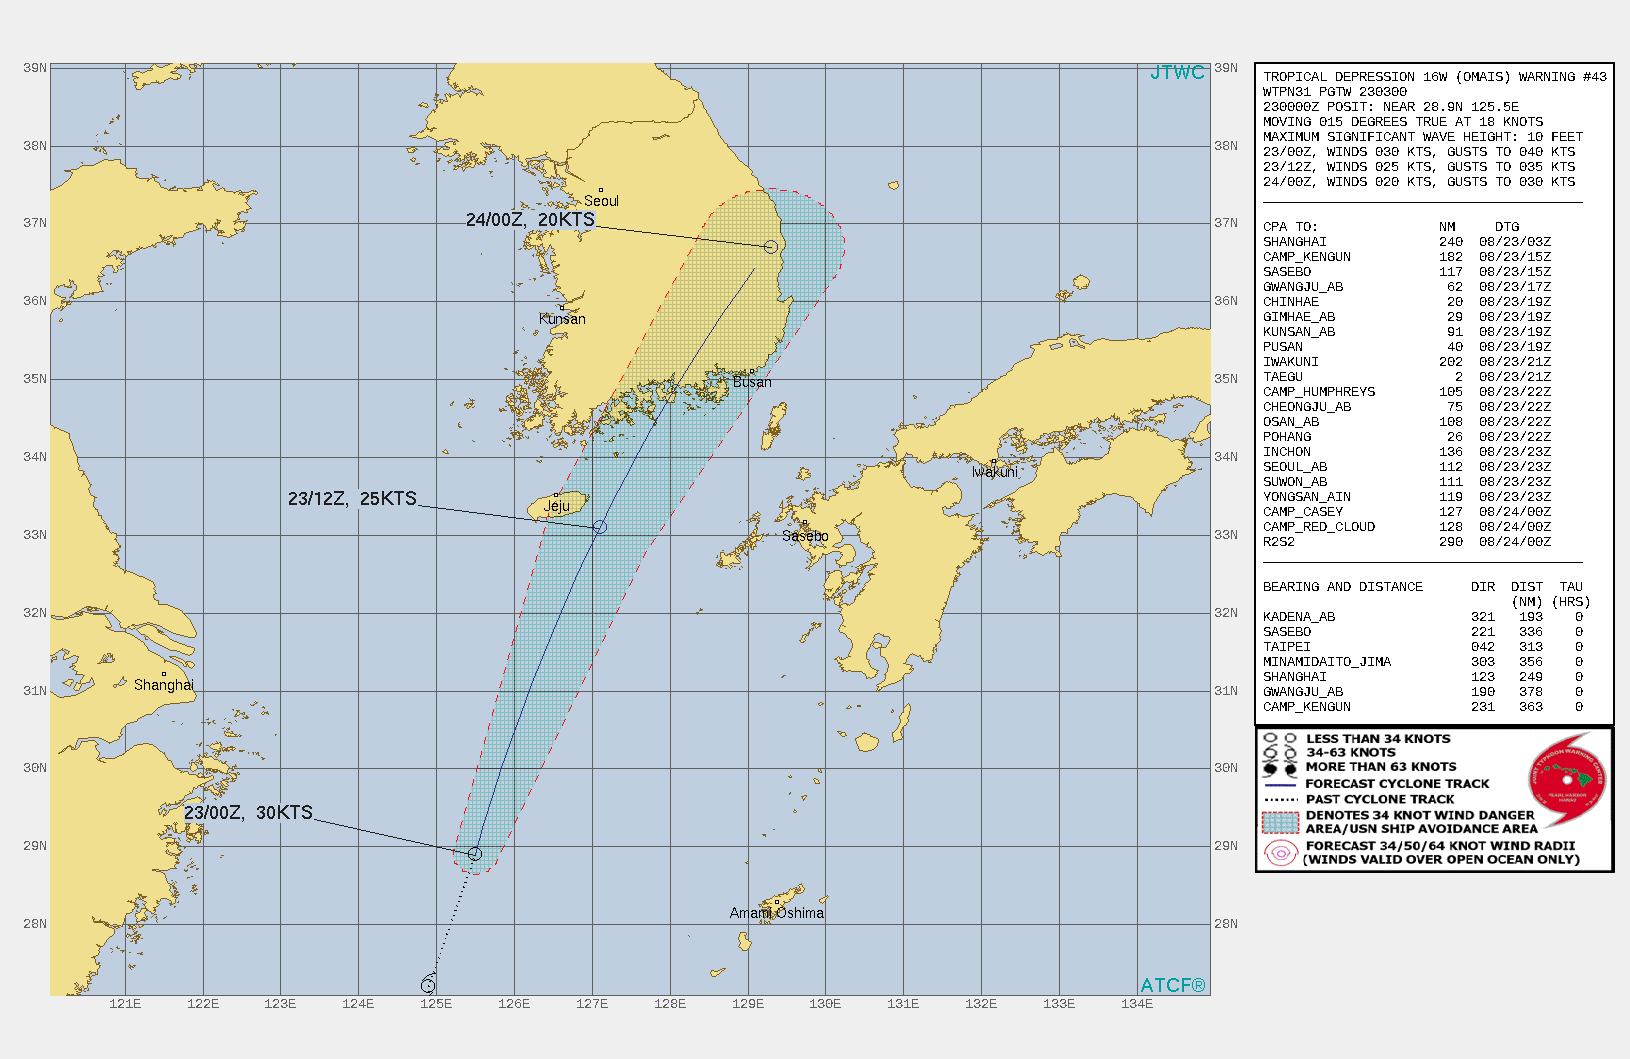 TD 16W(OMAIS). WARNING 43 ISSUED AT 23/03UTC.THERE ARE NO SIGNIFICANT CHANGES TO THE FORECAST FROM THE PREVIOUS WARNING.  FORECAST DISCUSSION: AS TROPICAL DEPRESSION 16W COMPLETES ITS TURN AROUND THE SUBTROPICAL RIDGE AXIS, IT WILL CONTINUE TRACKING NORTH-NORTHEASTWARD, WEAKENING TO 25 KTS BY 12H DUE TO HIGH VERTICAL WIND SHEAR FROM THE NORTH. THE SYSTEM WILL CONTINUE THIS TRACK AND WEAKEN TO 20 KTS AS IT DISSIPATES OVER THE KOREAN PENINSULA. THERE IS MEDIUM CONFIDENCE IN THE INTENSITY FORECAST DUE TO THE UNFAVORABLE ENVIRONMENT POSSIBLY DISSIPATING THE SYSTEM EARLIER THAN 24H.